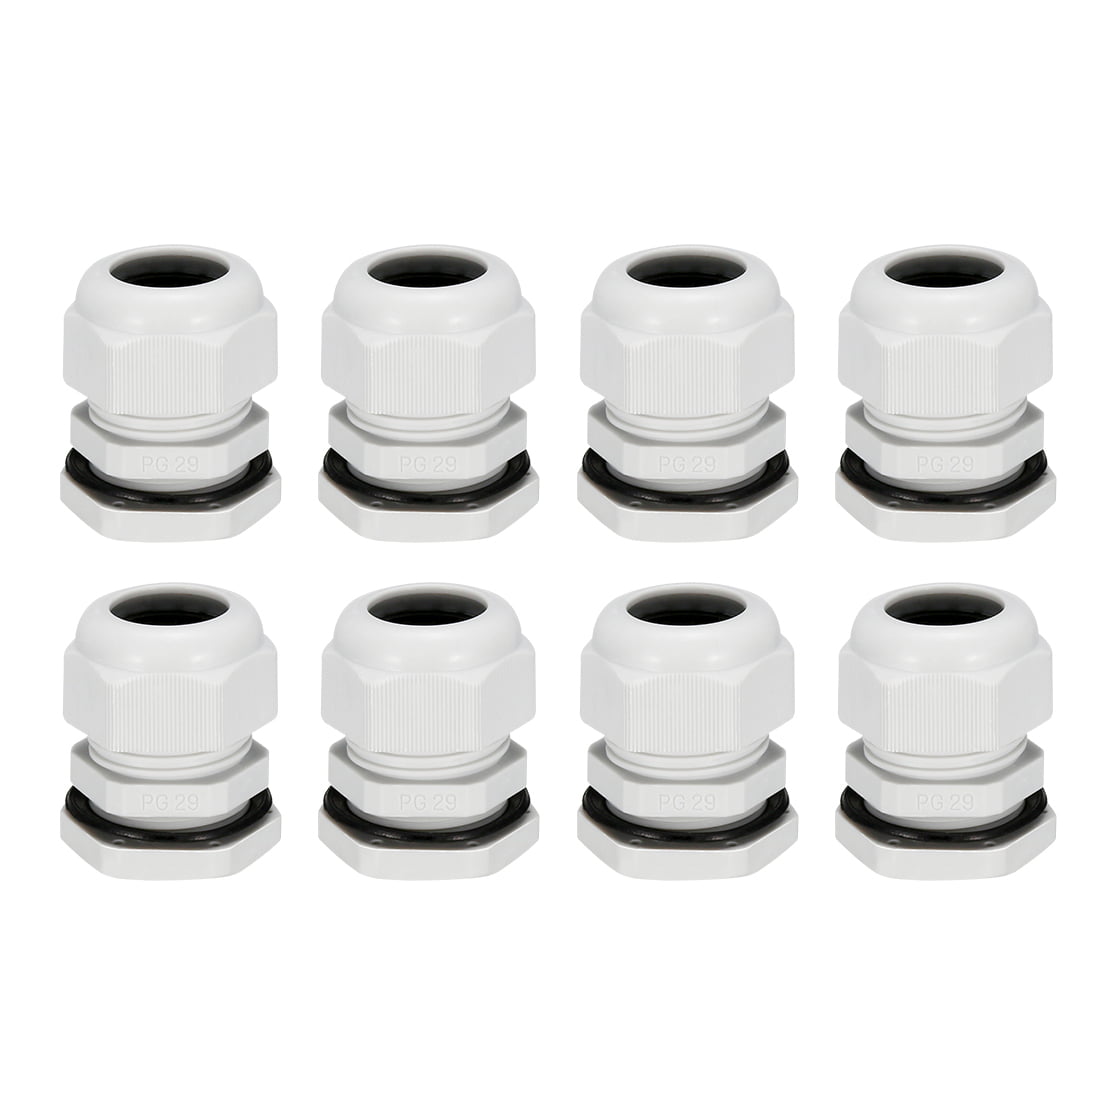 6Pcs PG11 Cable gland Waterproof plastic gasket Adjustable locknut White for 5mm to 10mm diameter cable 